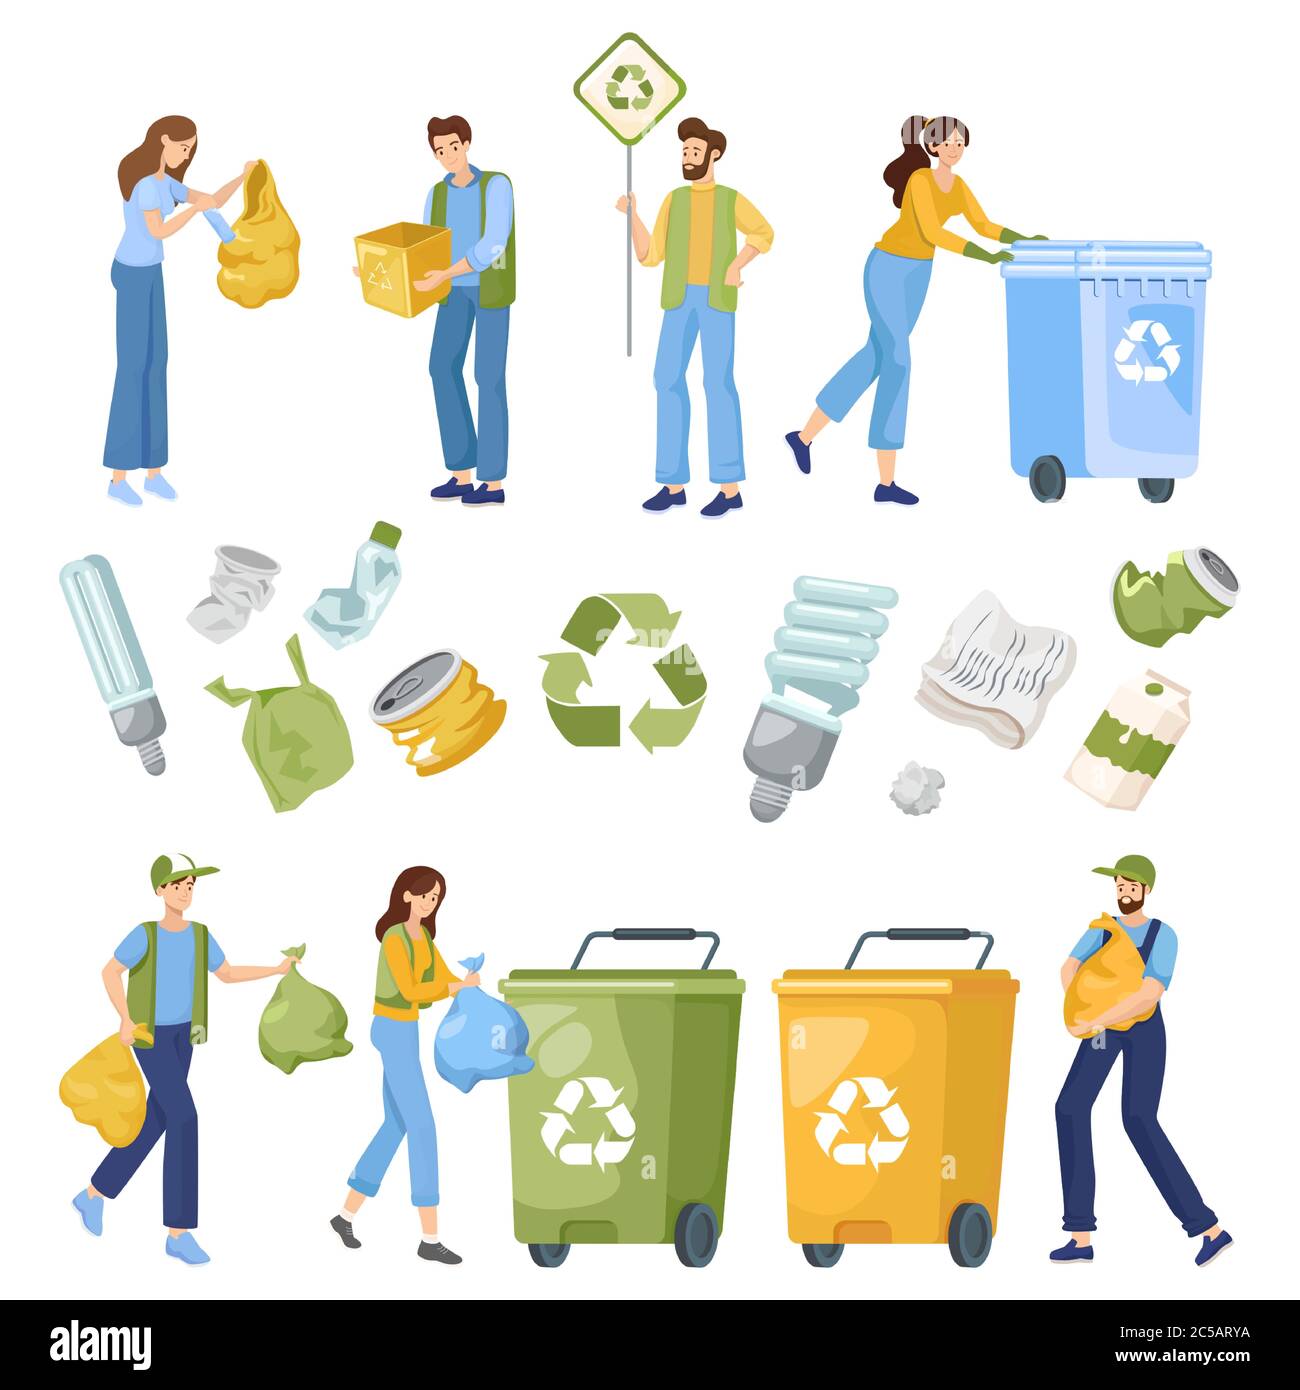 Reduce, reuse, and recycle objects. People put recycling waste in containers, collect, and sort garbage. Plastic bags, cans, cardboards, light bulbs and recycle sign. Eco-friendly lifestyle. Stock Vector